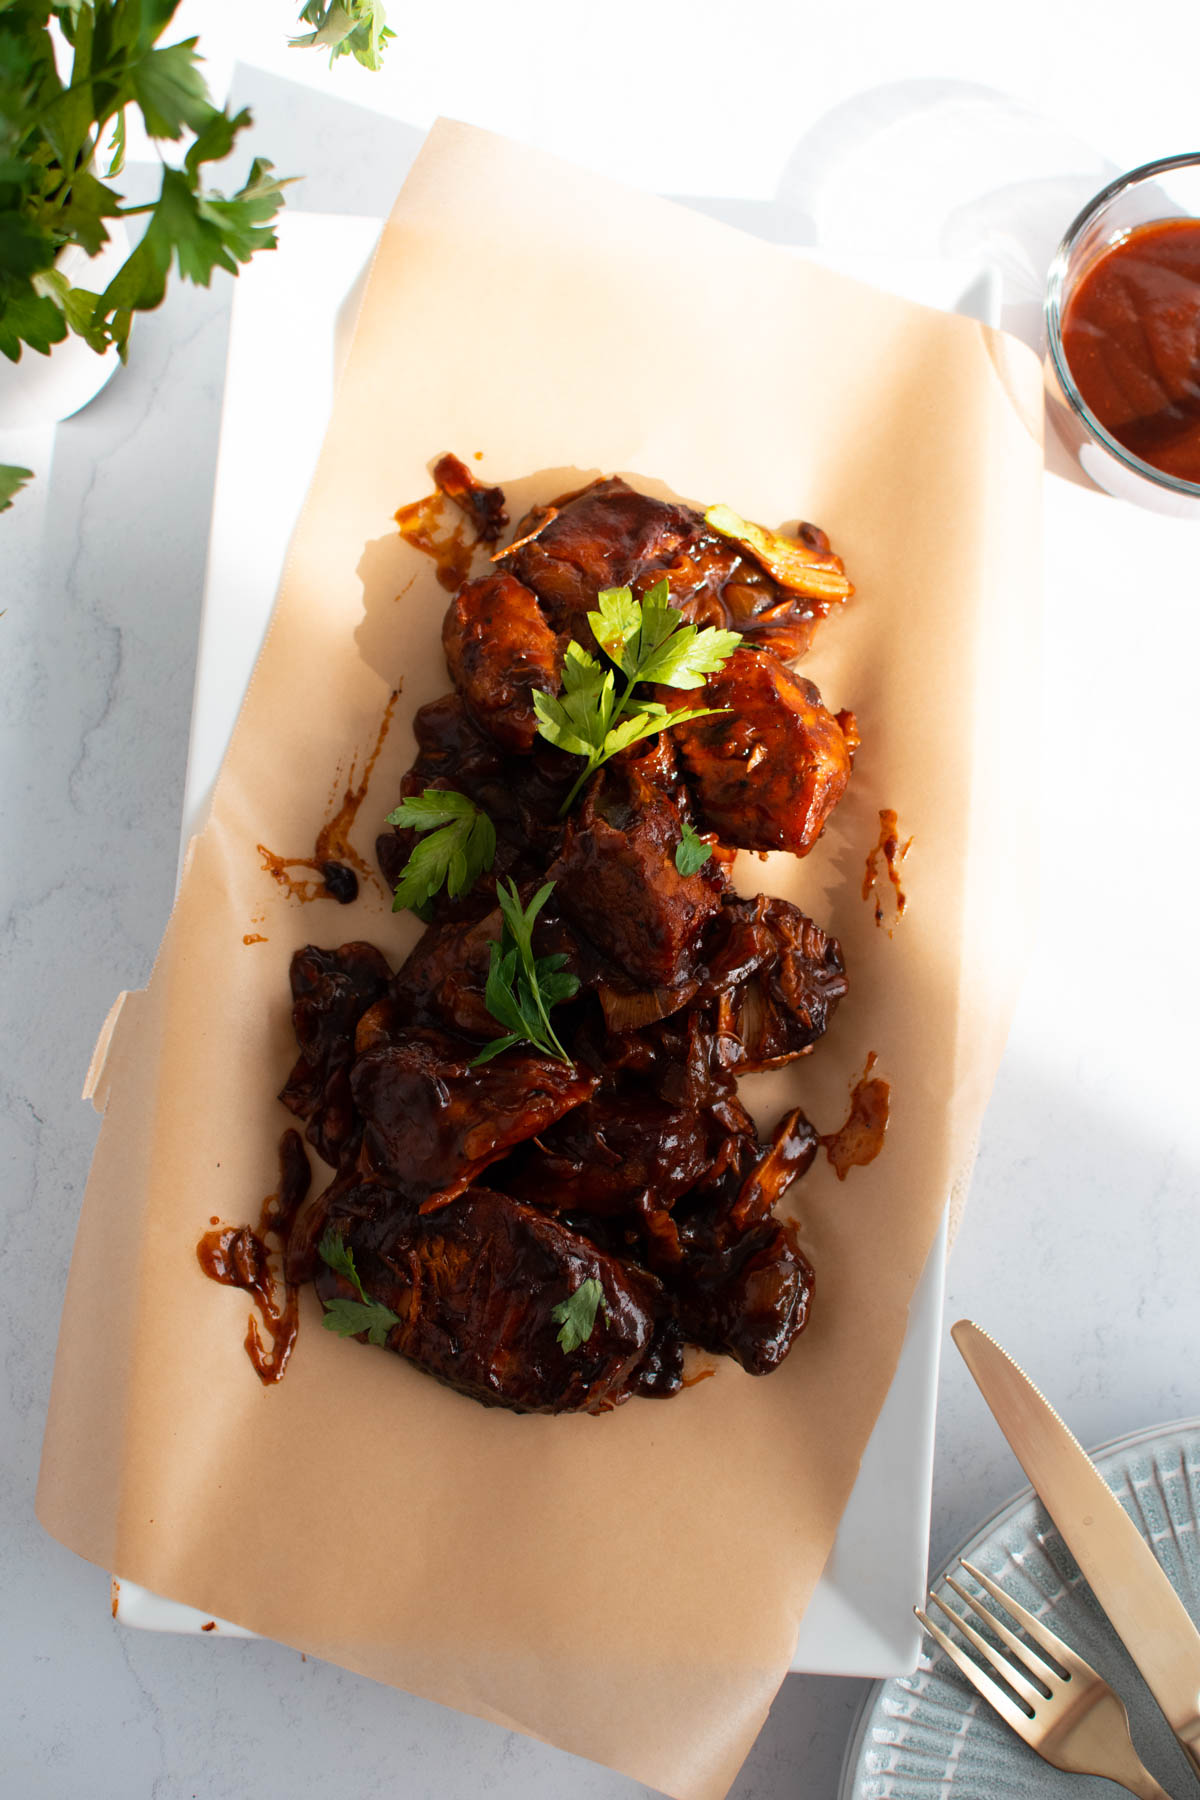 Country style ribs with barbeque sauce on brown parchment paper and garnished with fresh parsley.